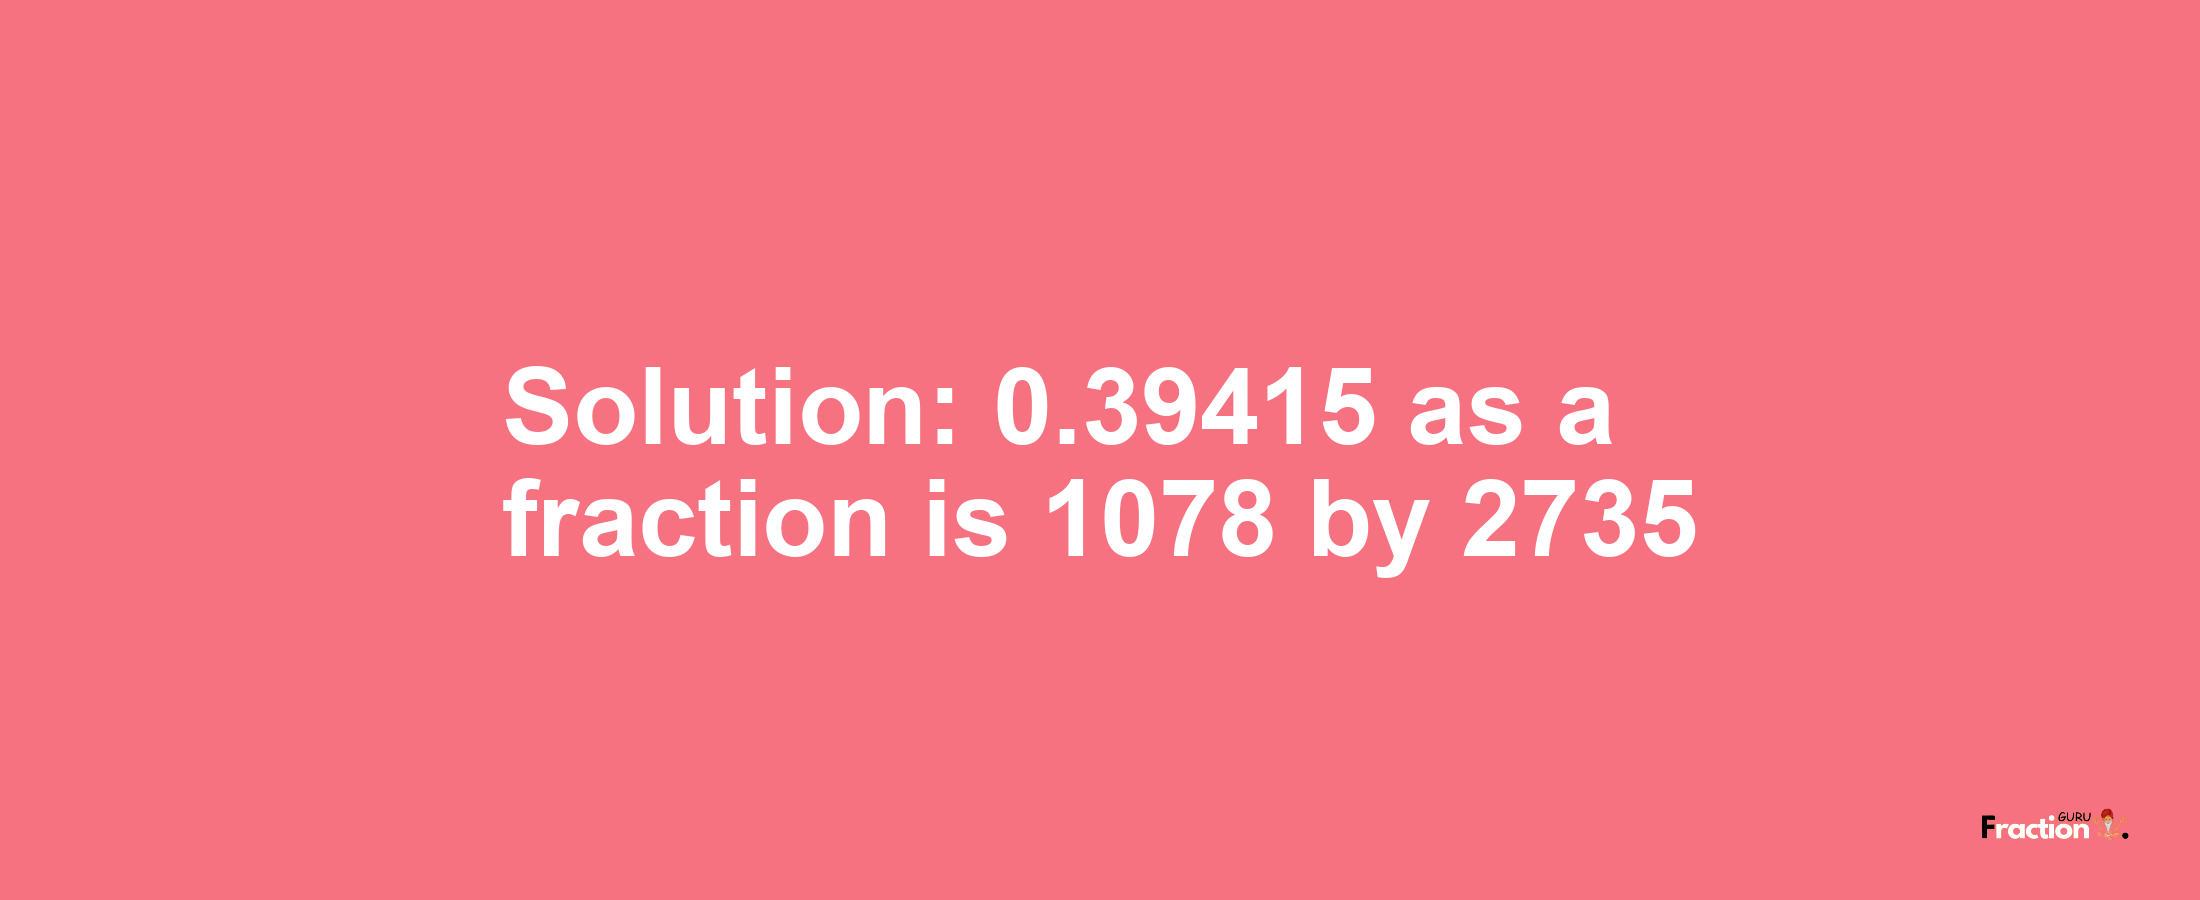 Solution:0.39415 as a fraction is 1078/2735